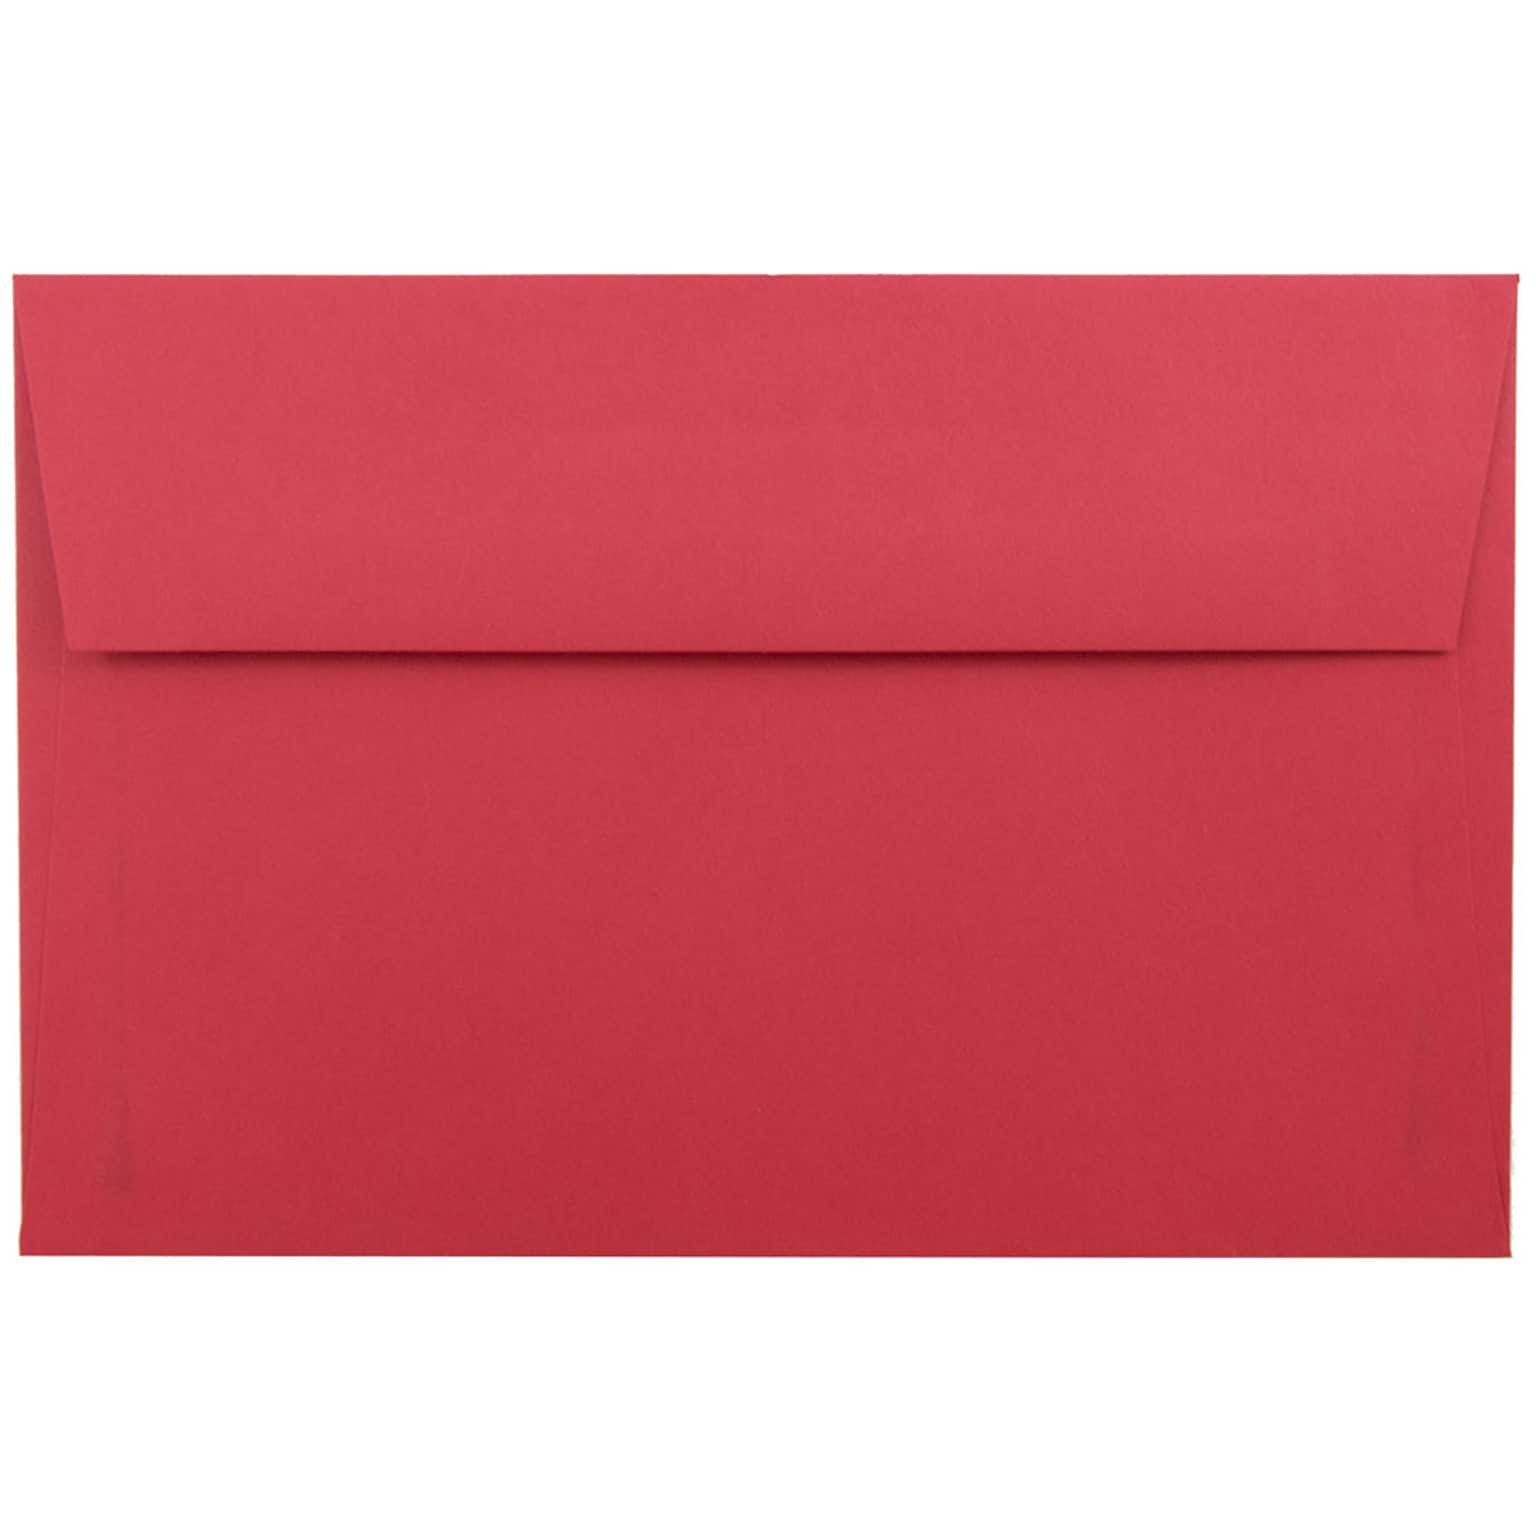 JAM Paper® A9 Colored Invitation Envelopes, 5.75 x 8.75, Red Recycled, 50/Pack (14257I)